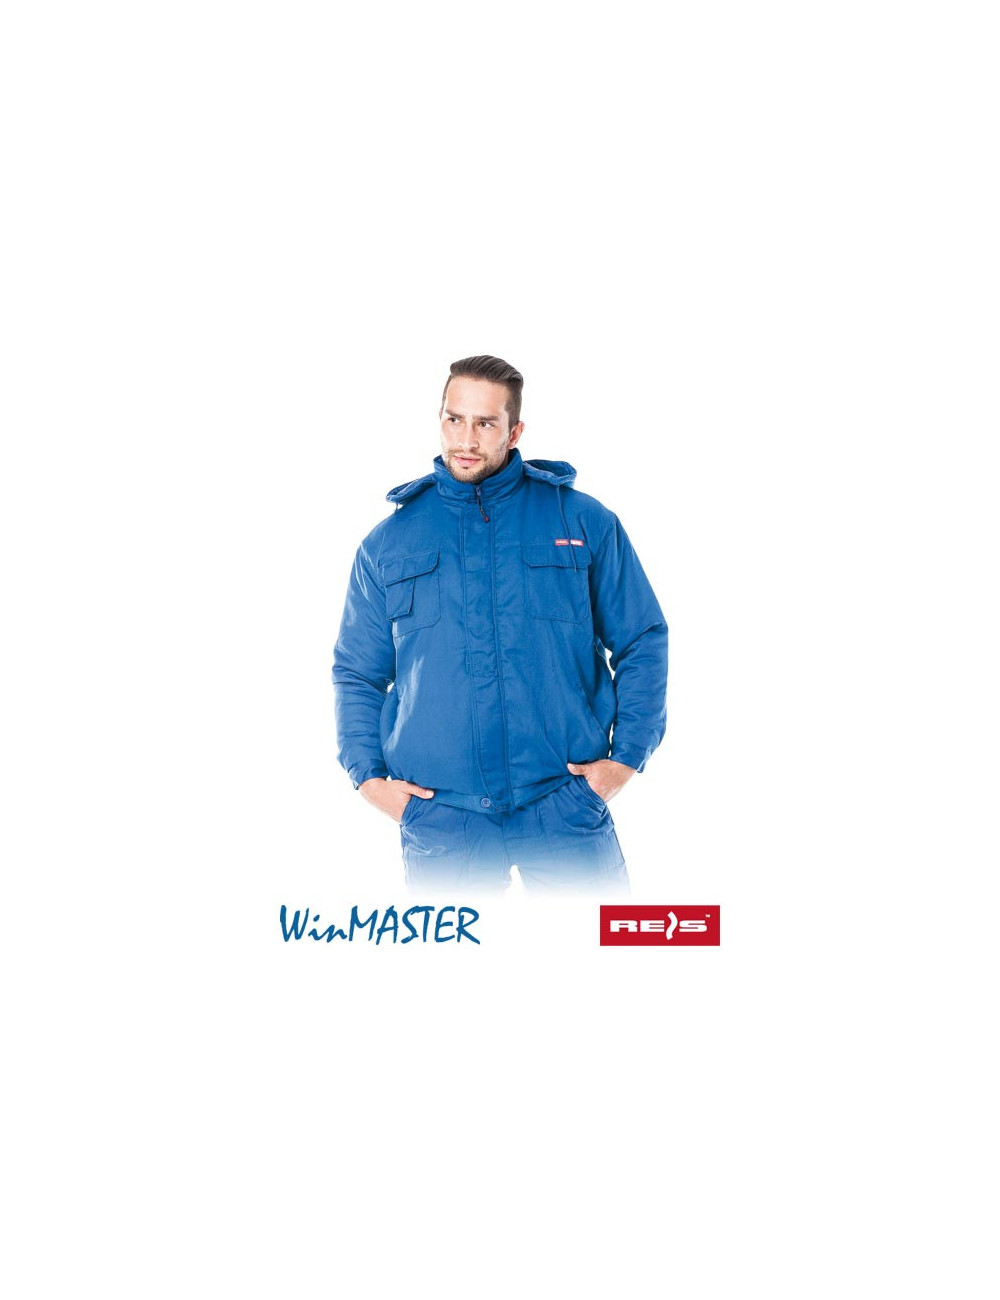 Protective jacket insulated kmo-plus n blue Reis